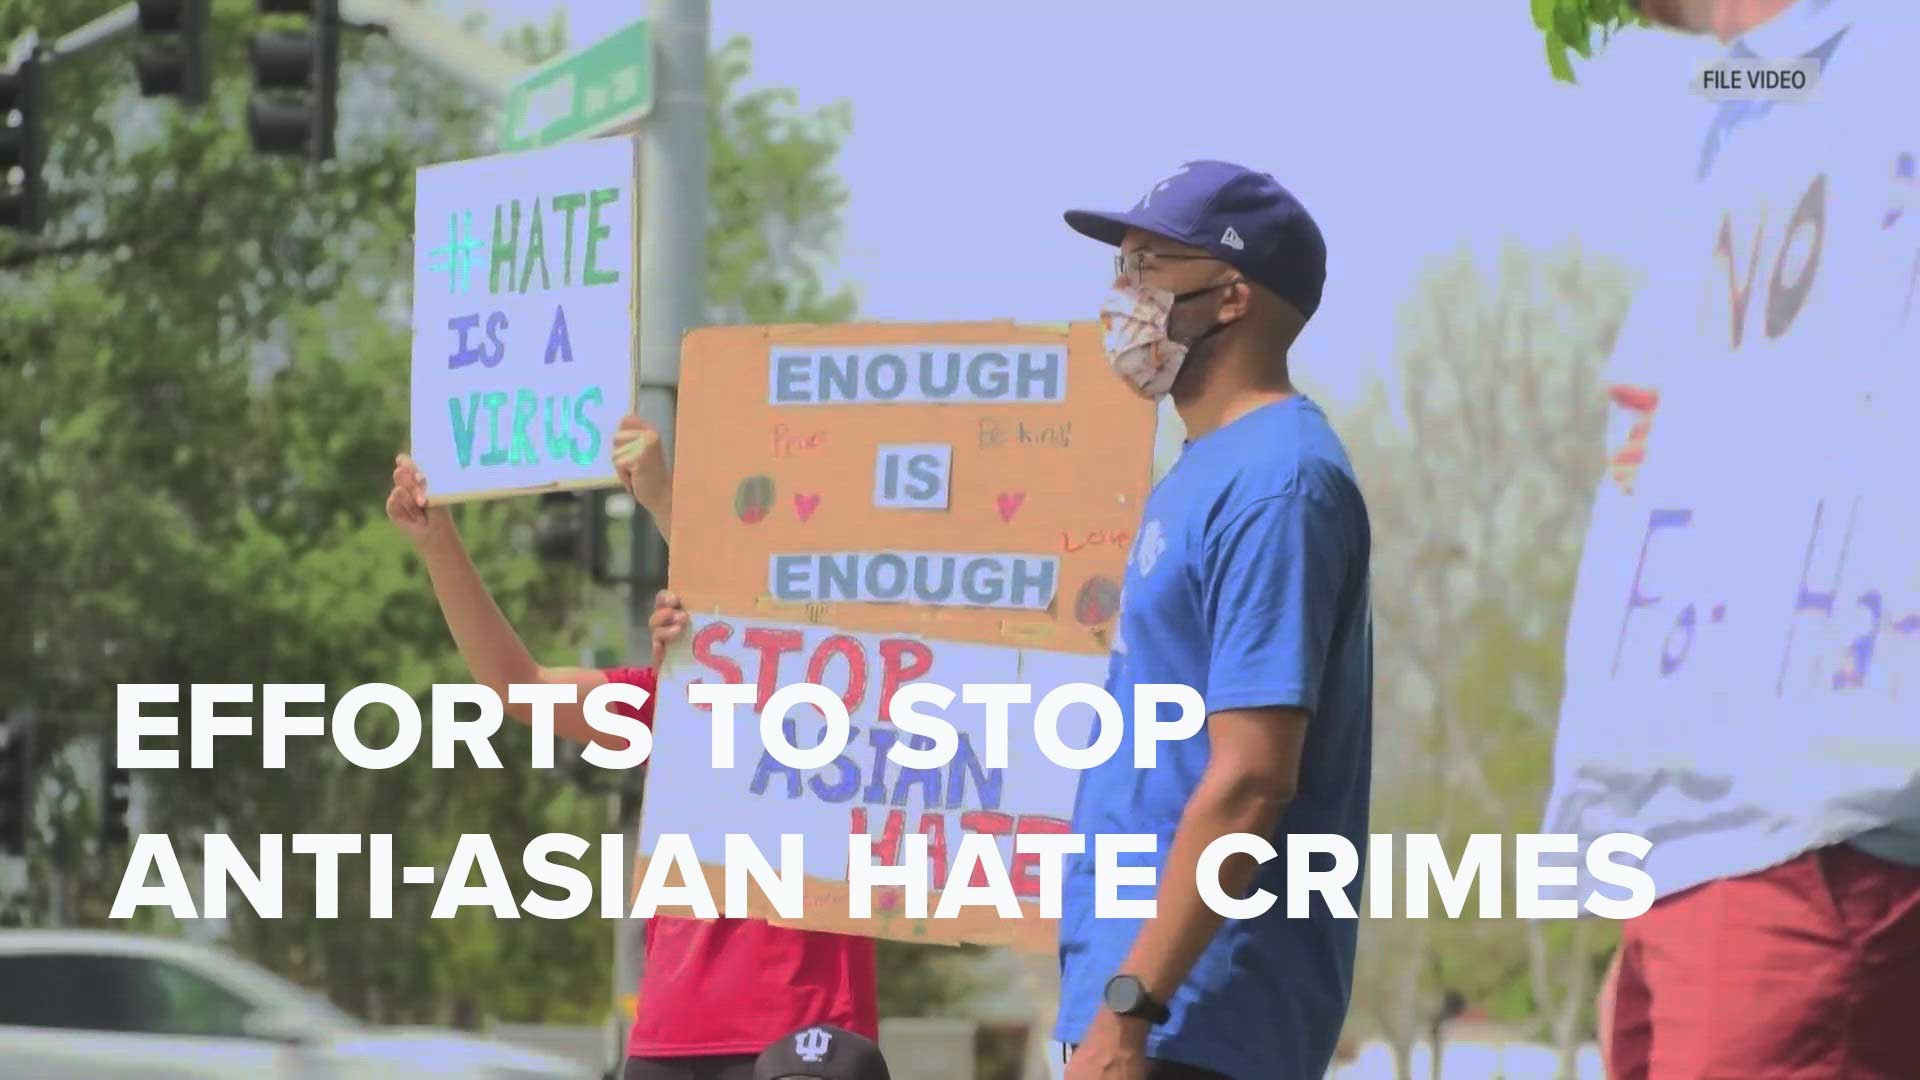 A look at efforts underway to stop anti-Asian hate crimes